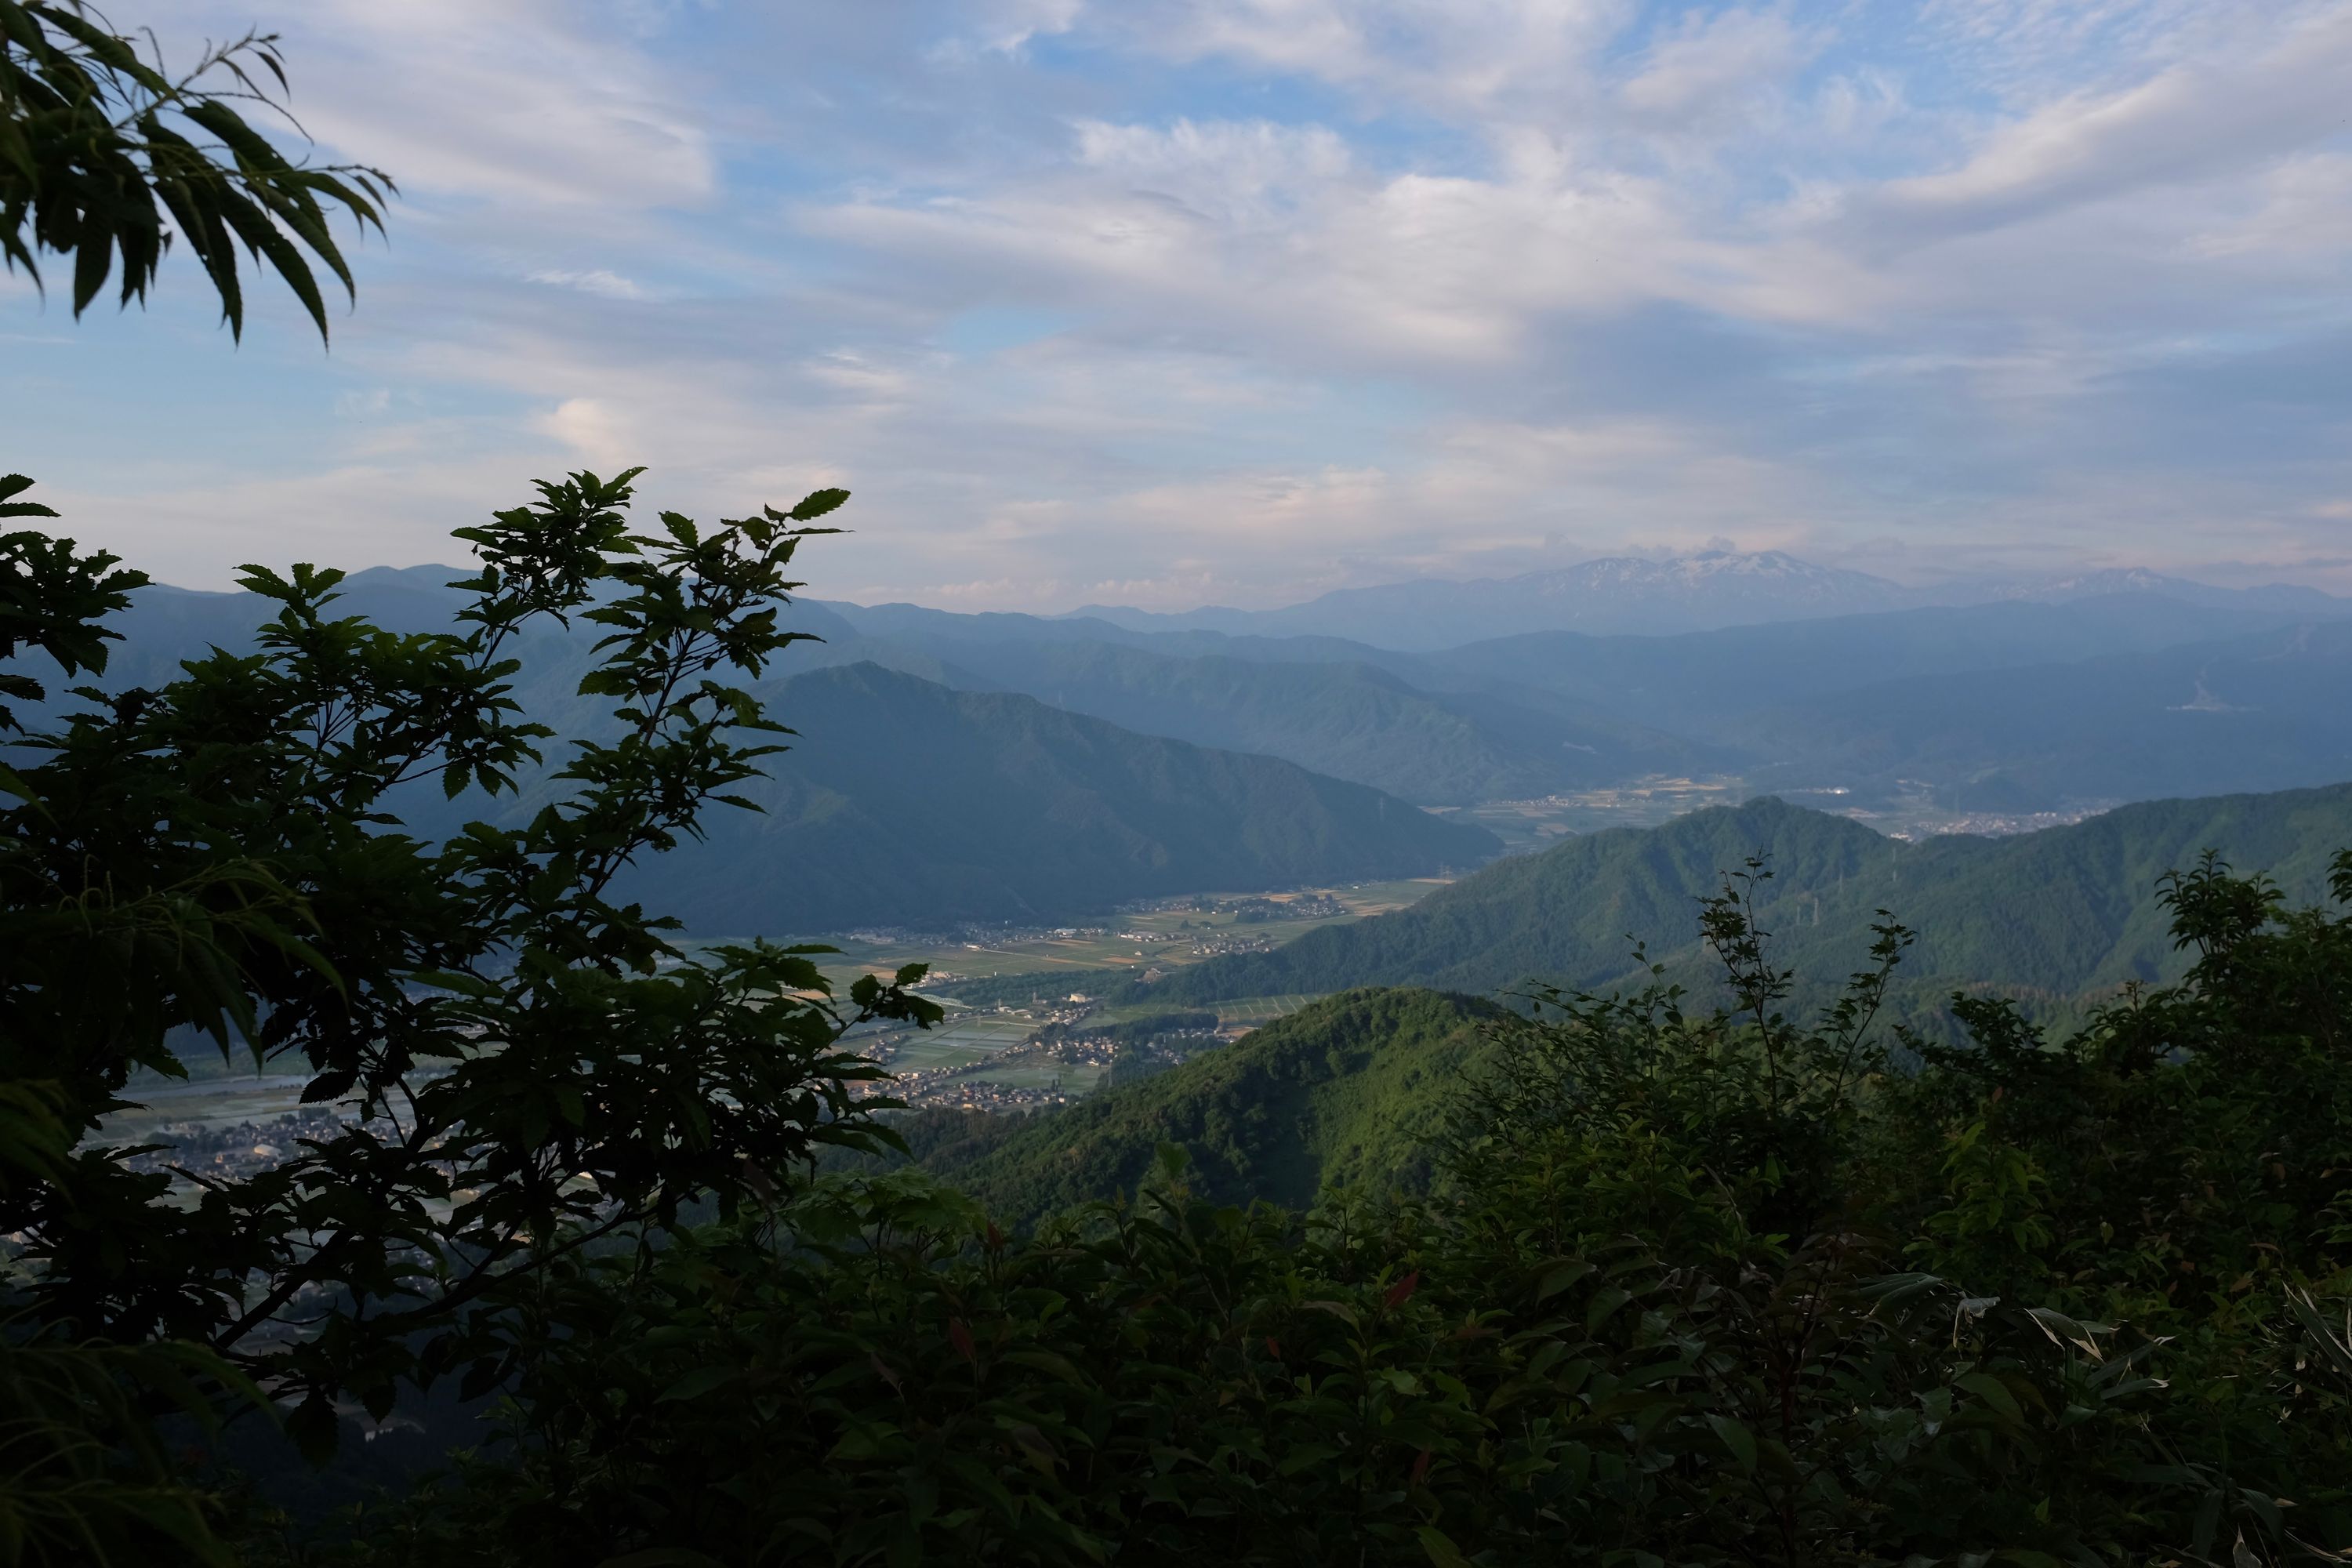 View of distant snow peak, Hakusan, from a densely forested hilltop.